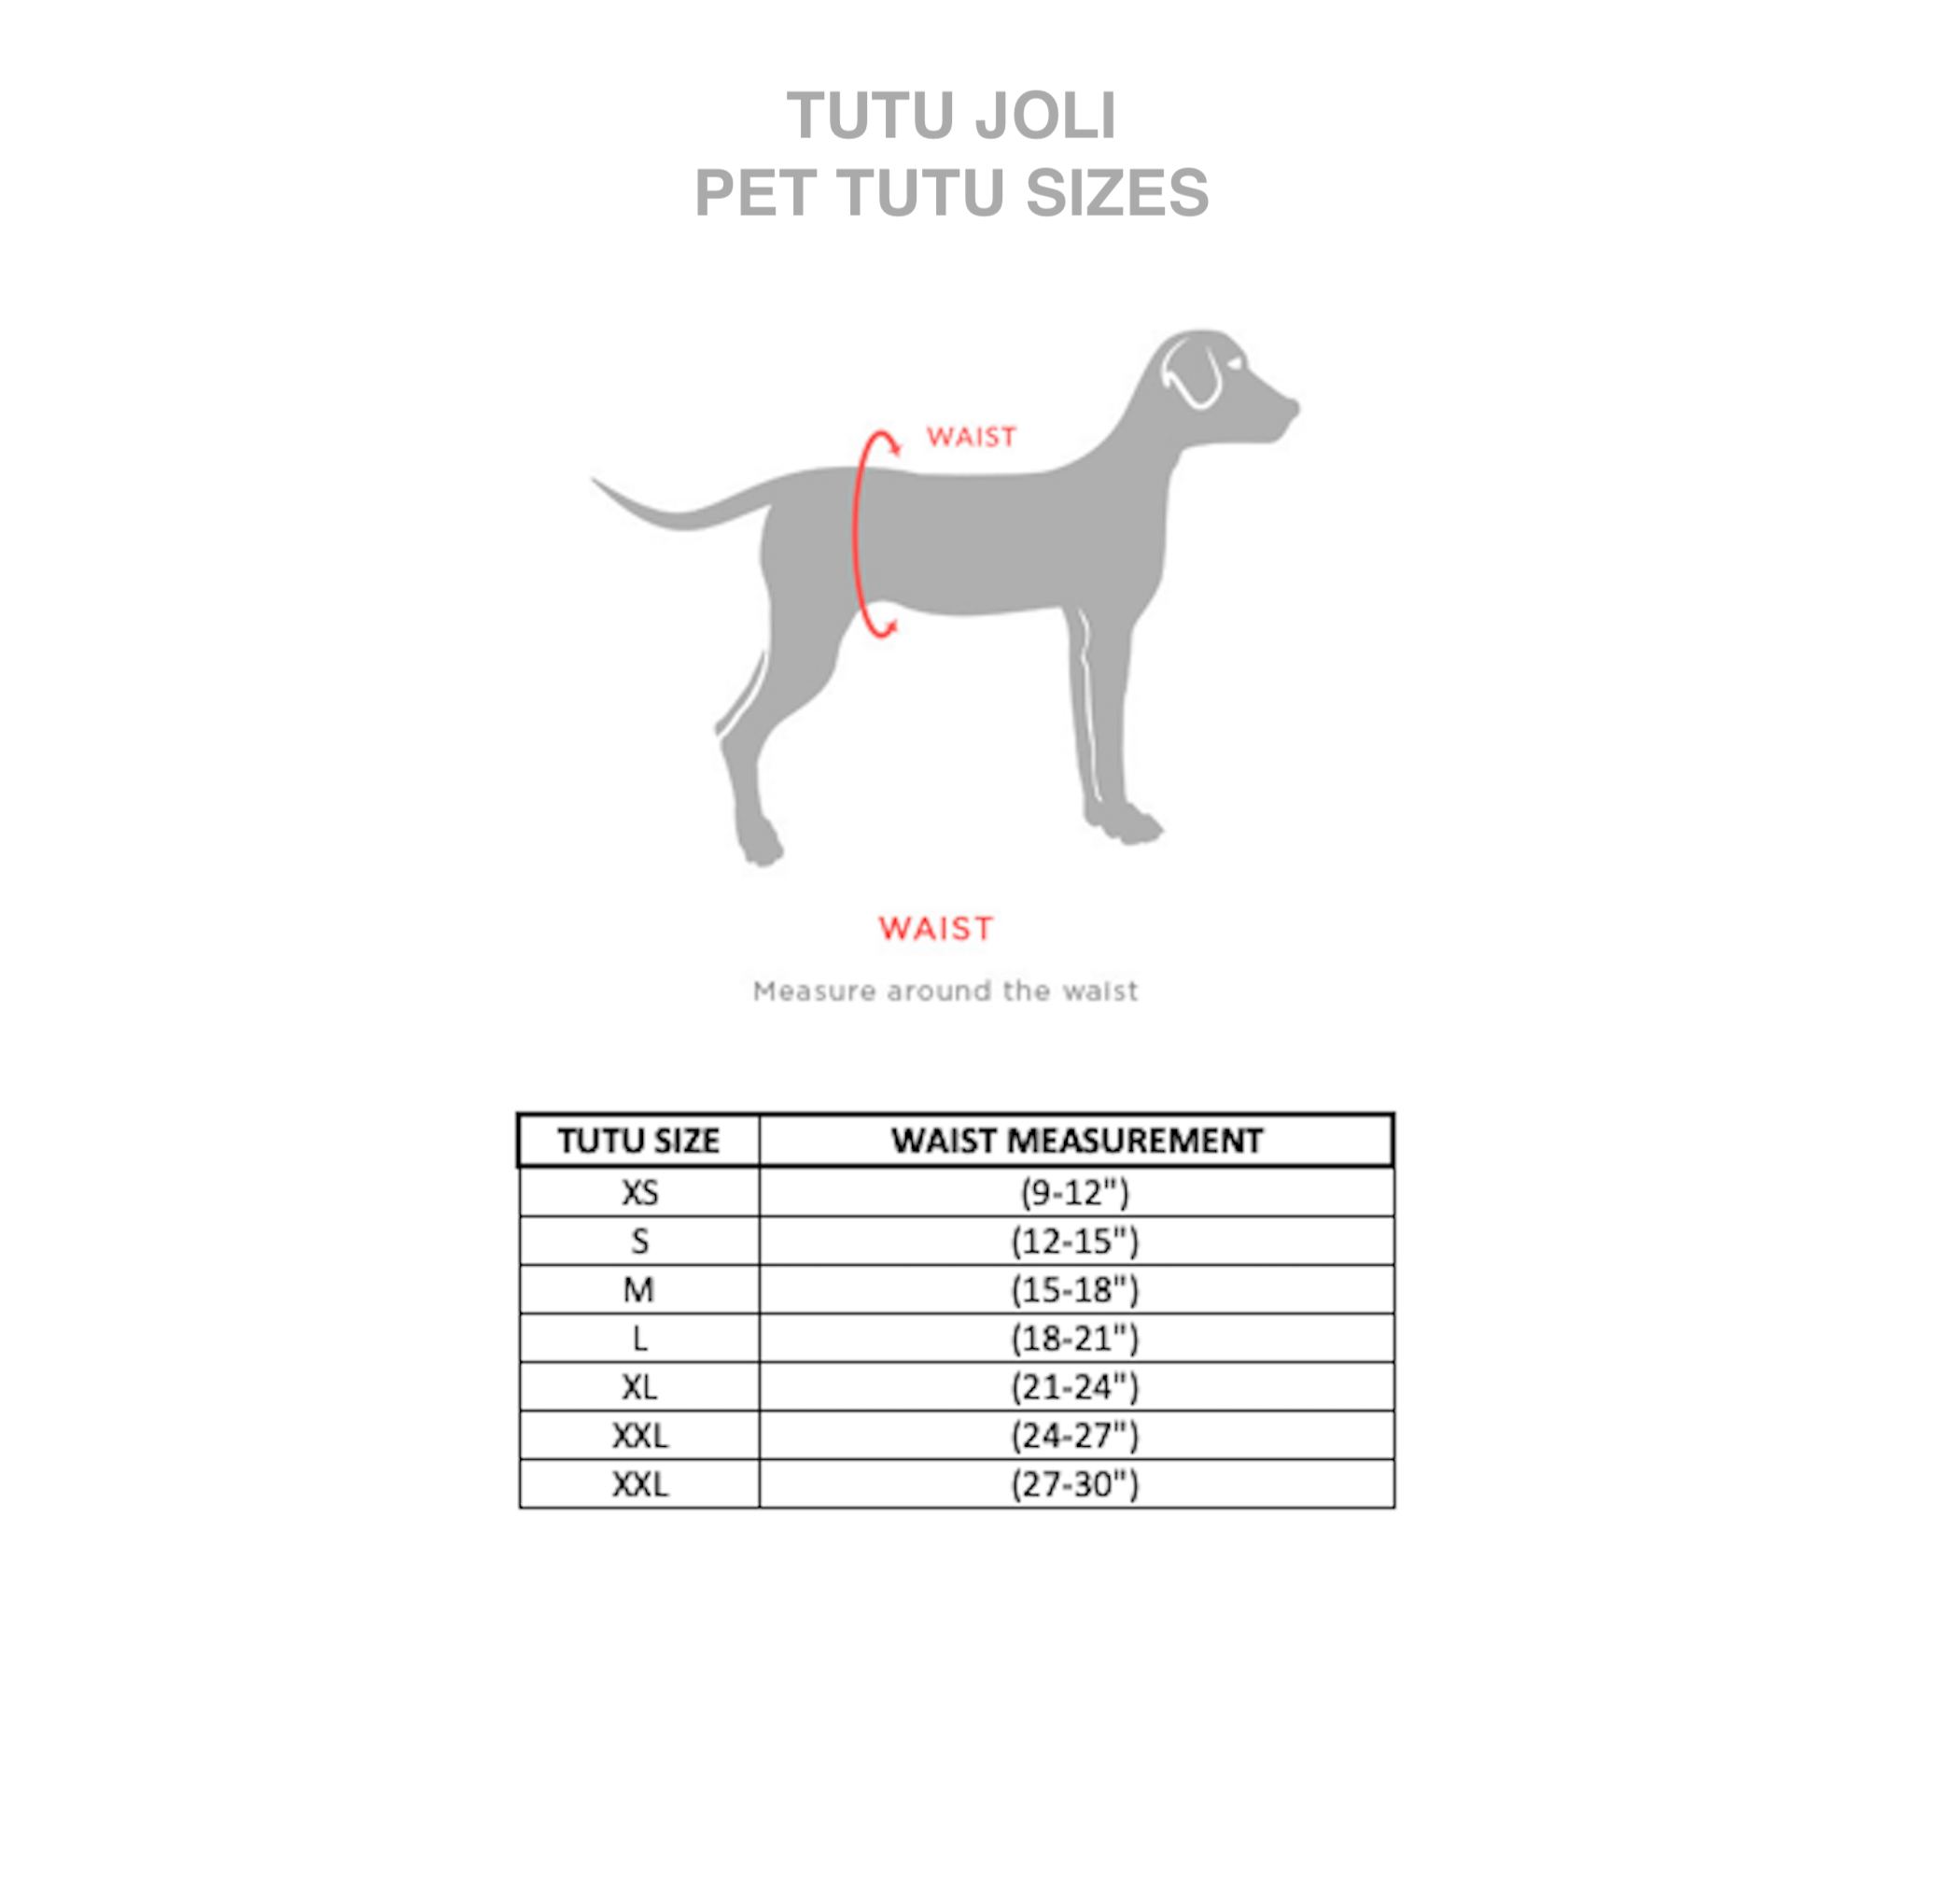 Dog size measurements, tutu joli, pet sizing, pet sizes for tutus, pet outfit measure, how to measure a  dog for a 4th of july tutu costume